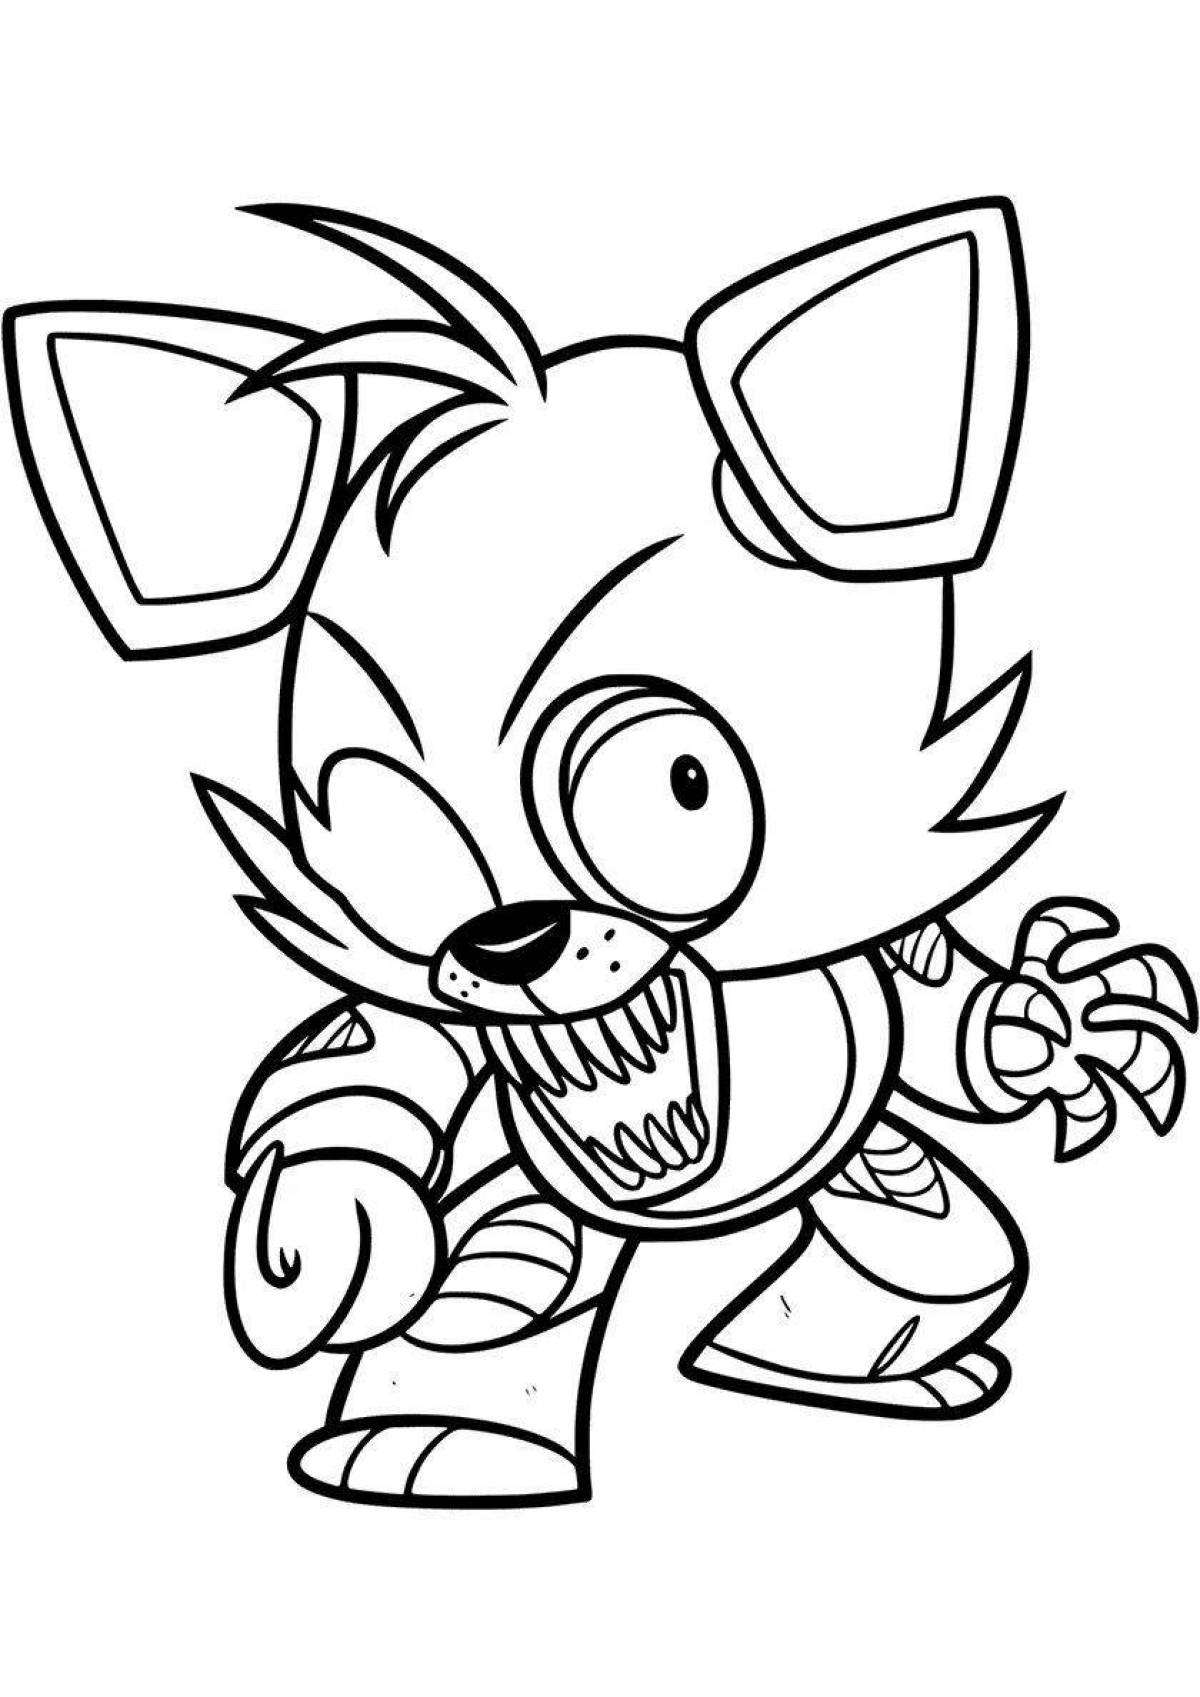 Charming foxy fnaf 9 coloring book